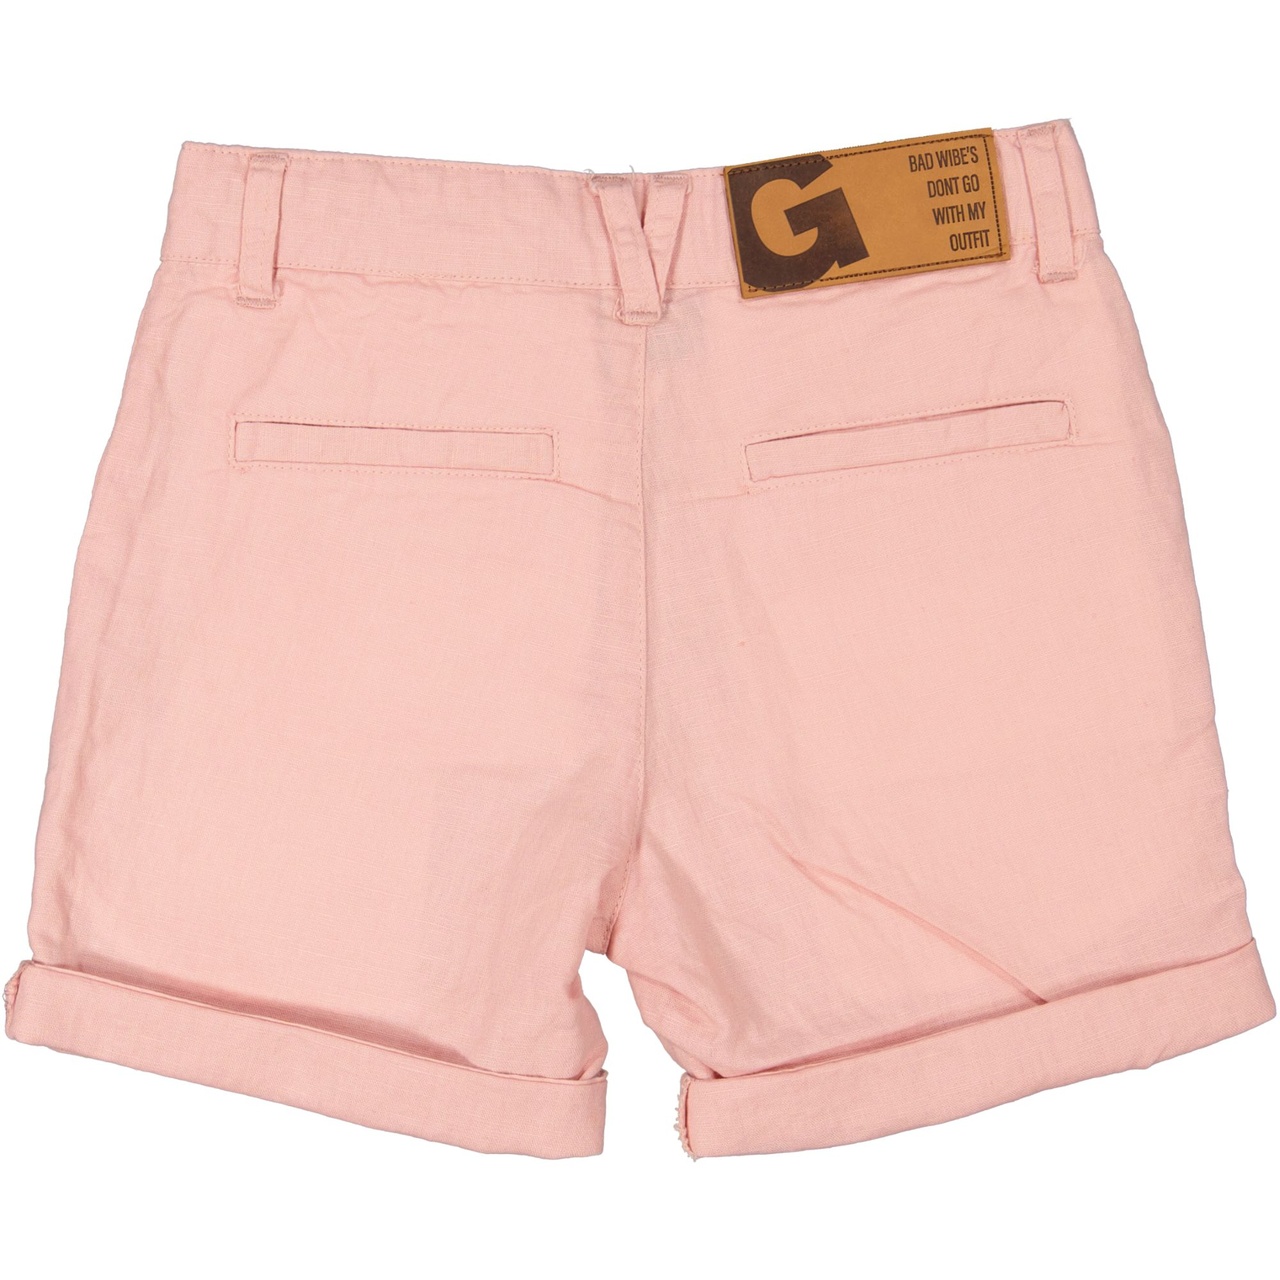 Linnen shorts Old pink 74/80